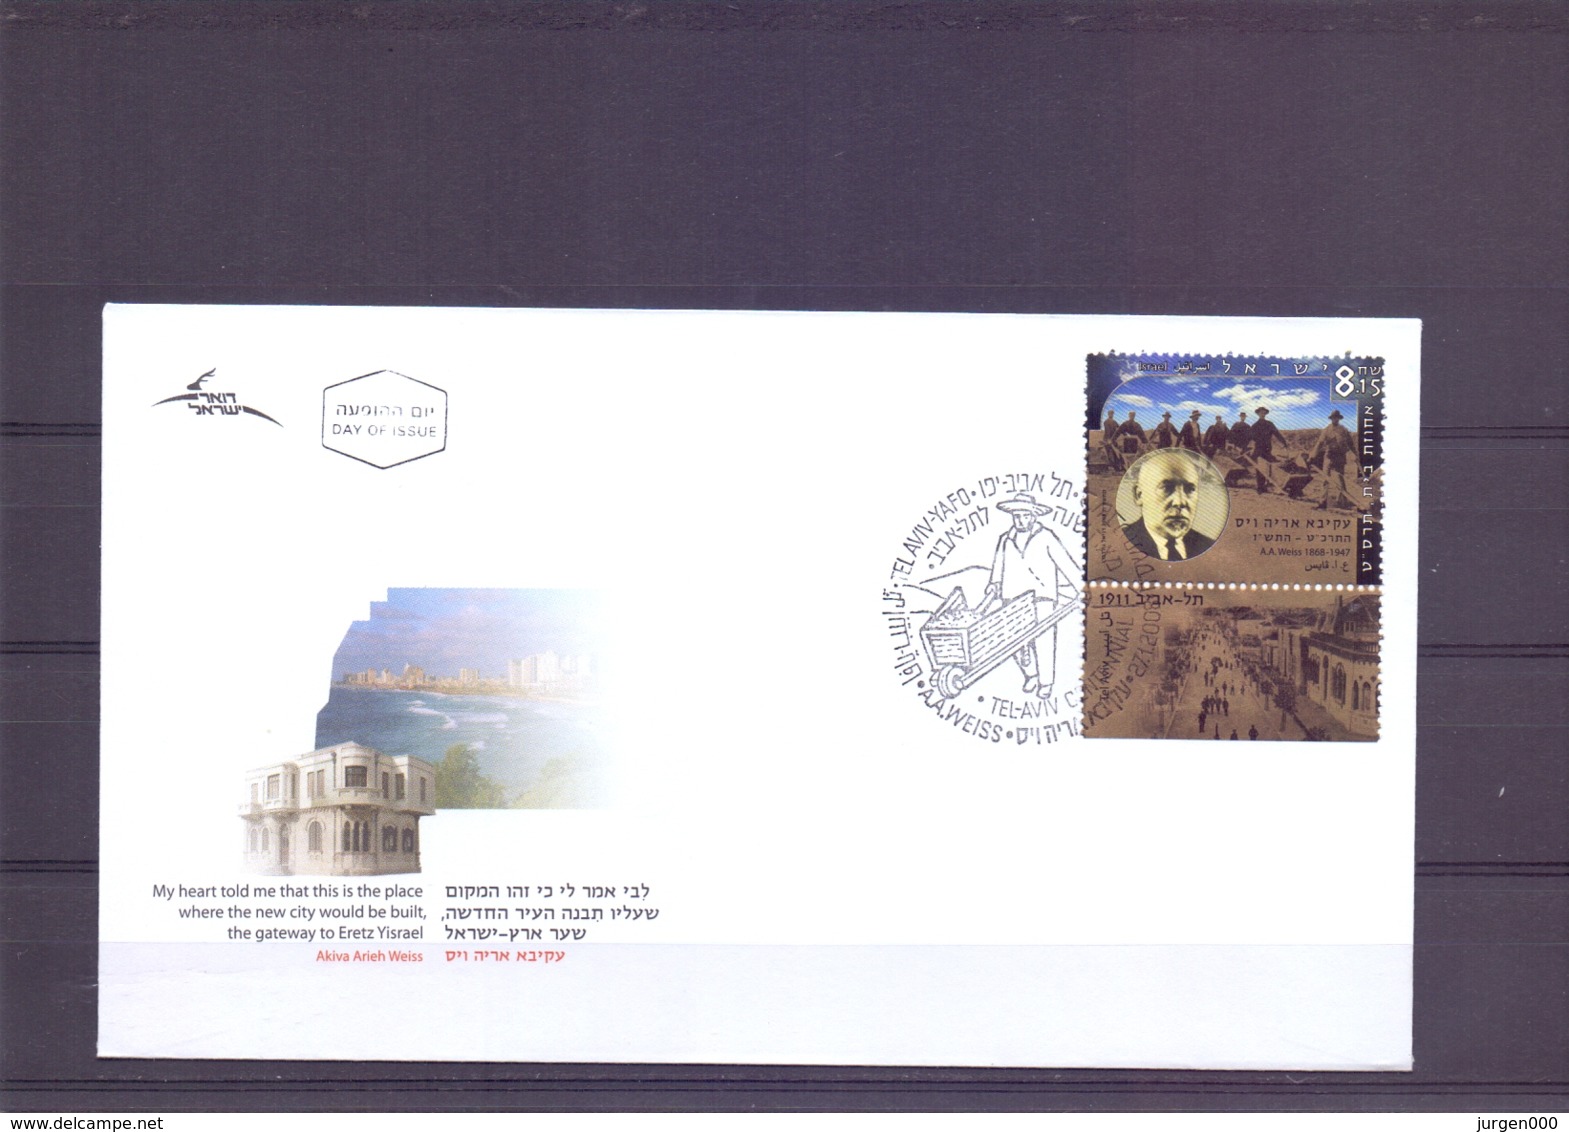 Israel - FDC - A.A. Weiss - Michel 1972 - Tel Aviv 27/1/2008   (RM14857) - Lettres & Documents